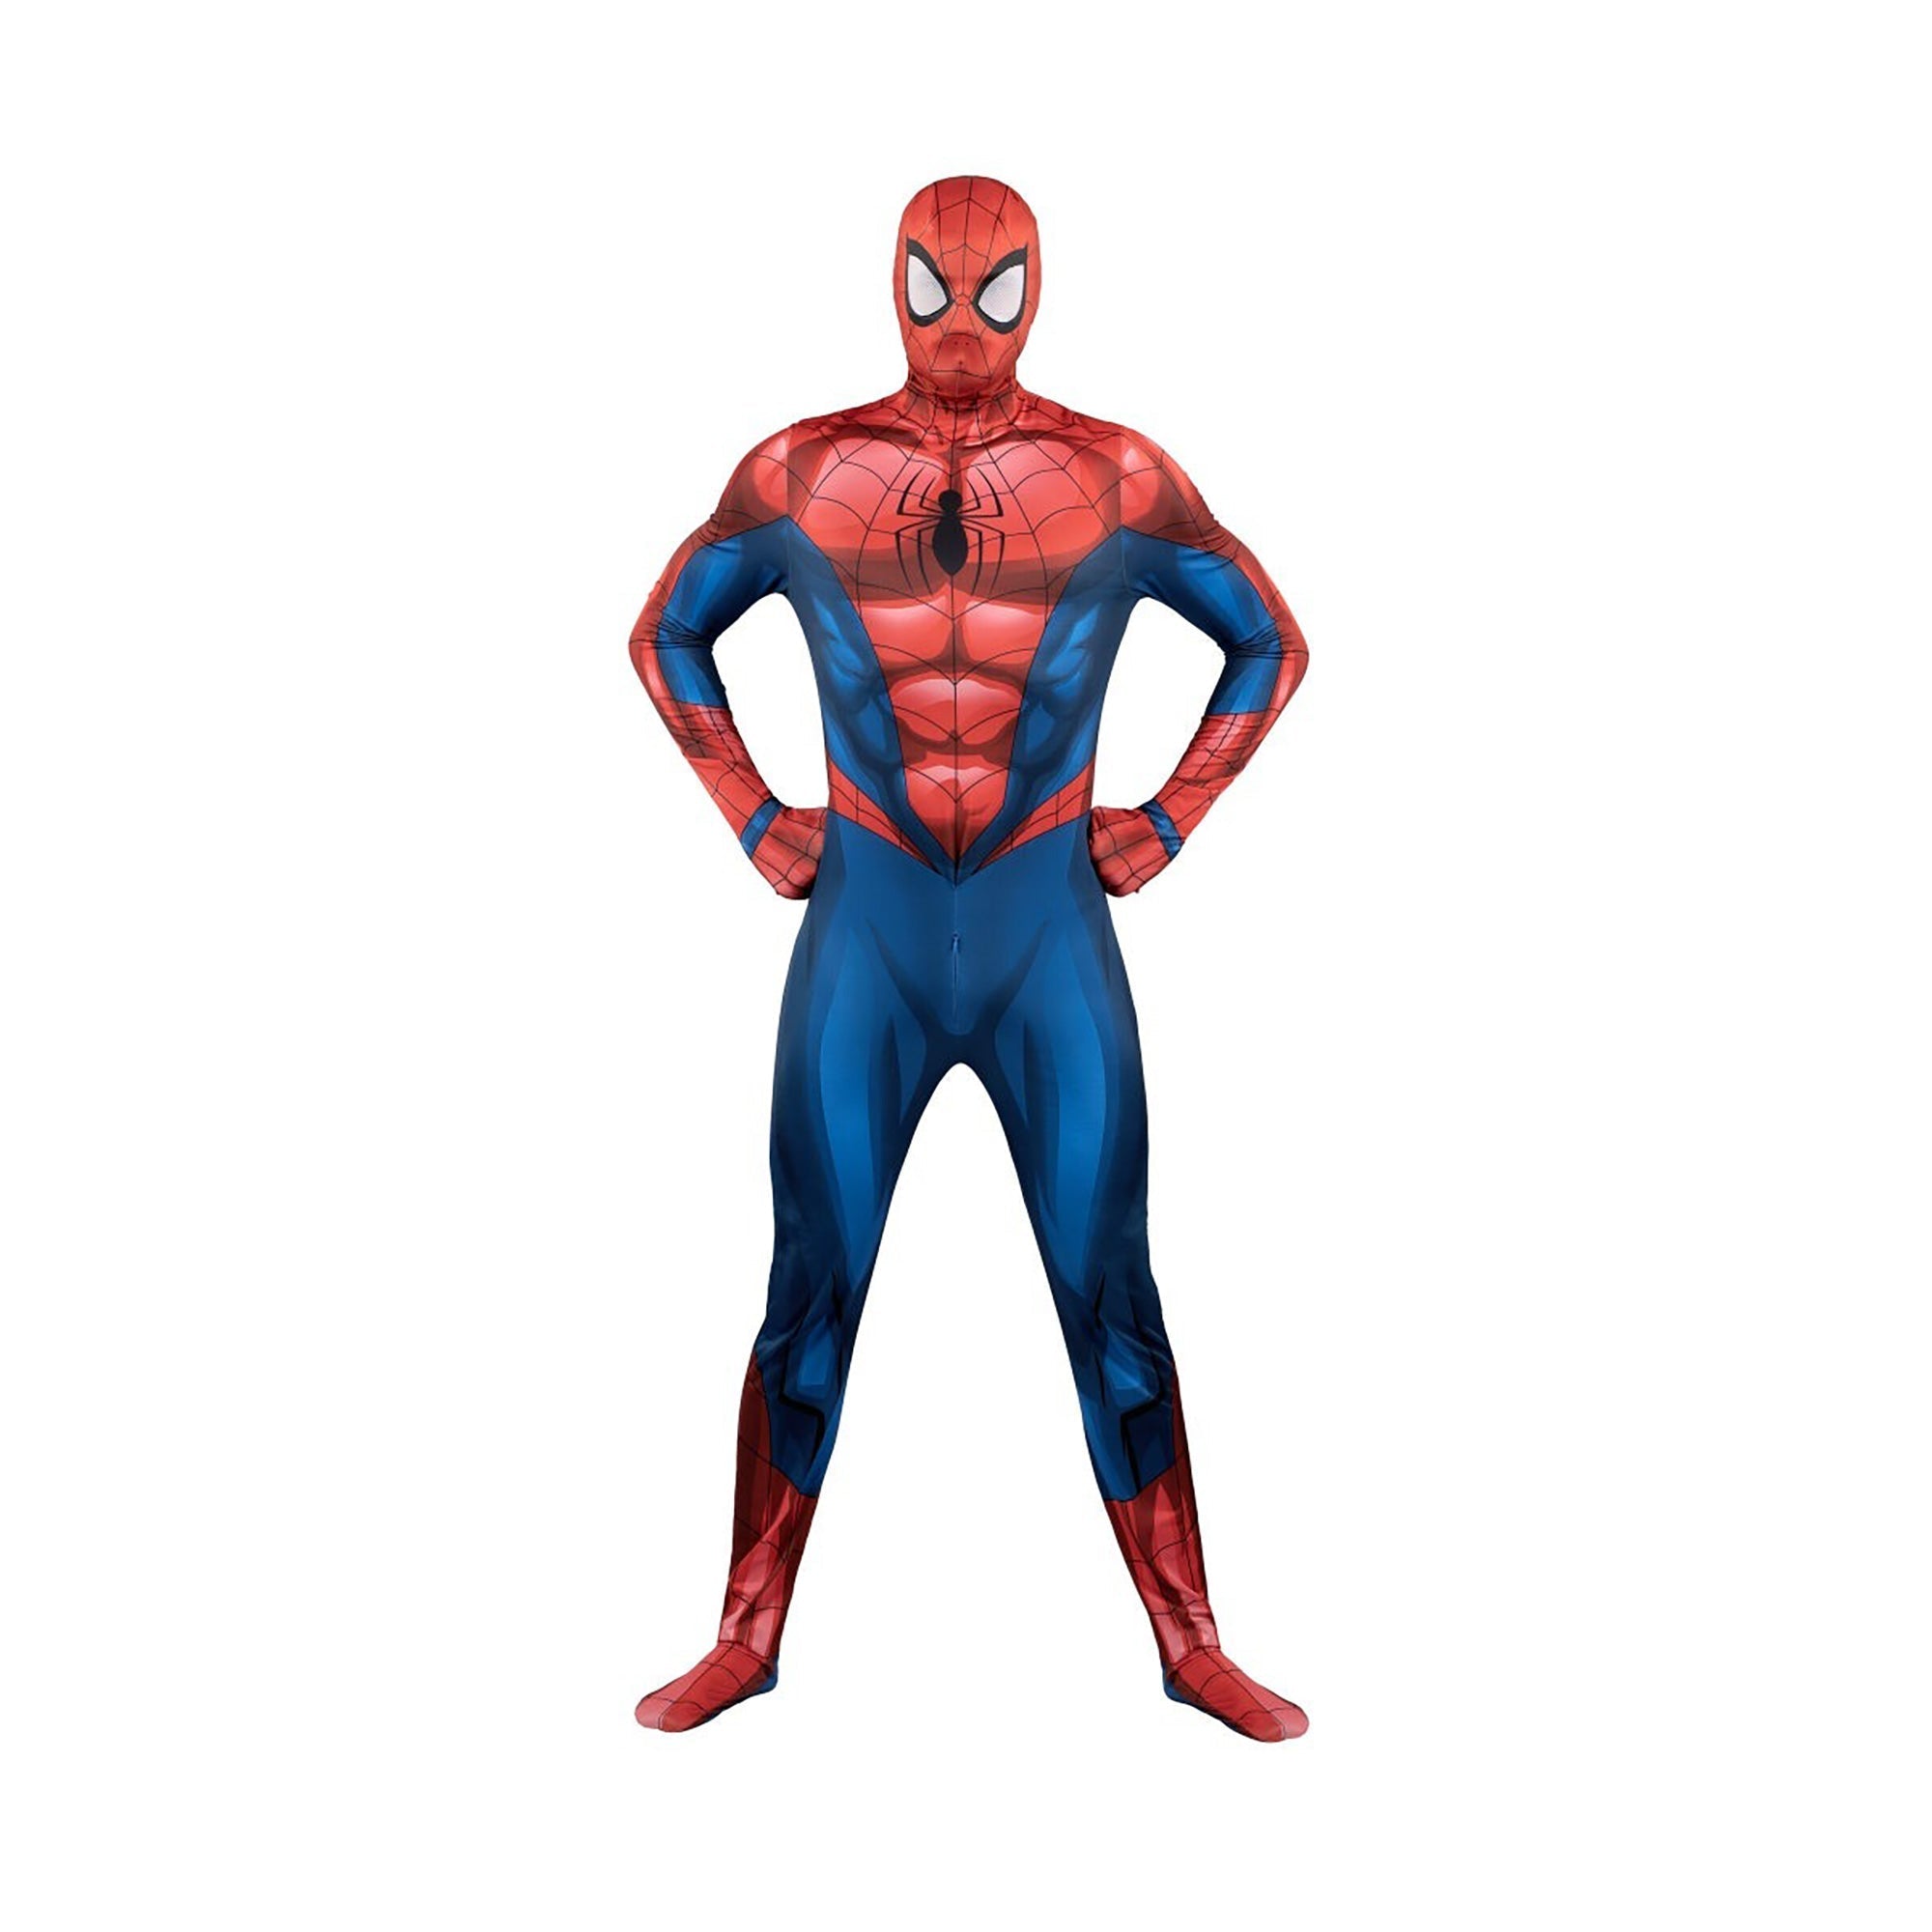 Disney Collection Spiderman Roleplay Boys Costume